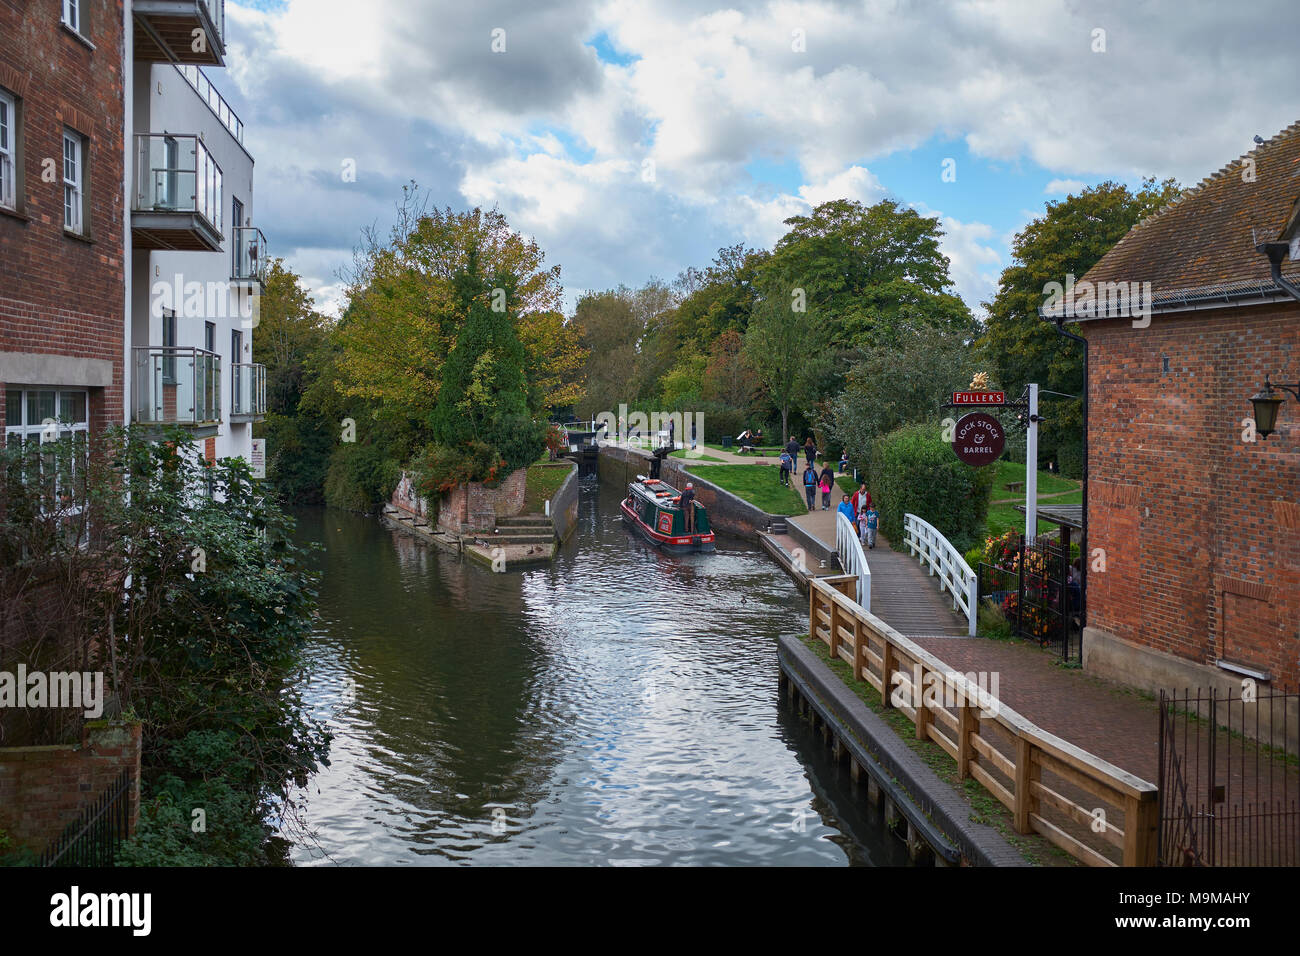 A barge traveling along the Kennet and Avon canal through the town of  Newbury, West Berkshire, with buildings both sides and people walking on a path Stock Photo